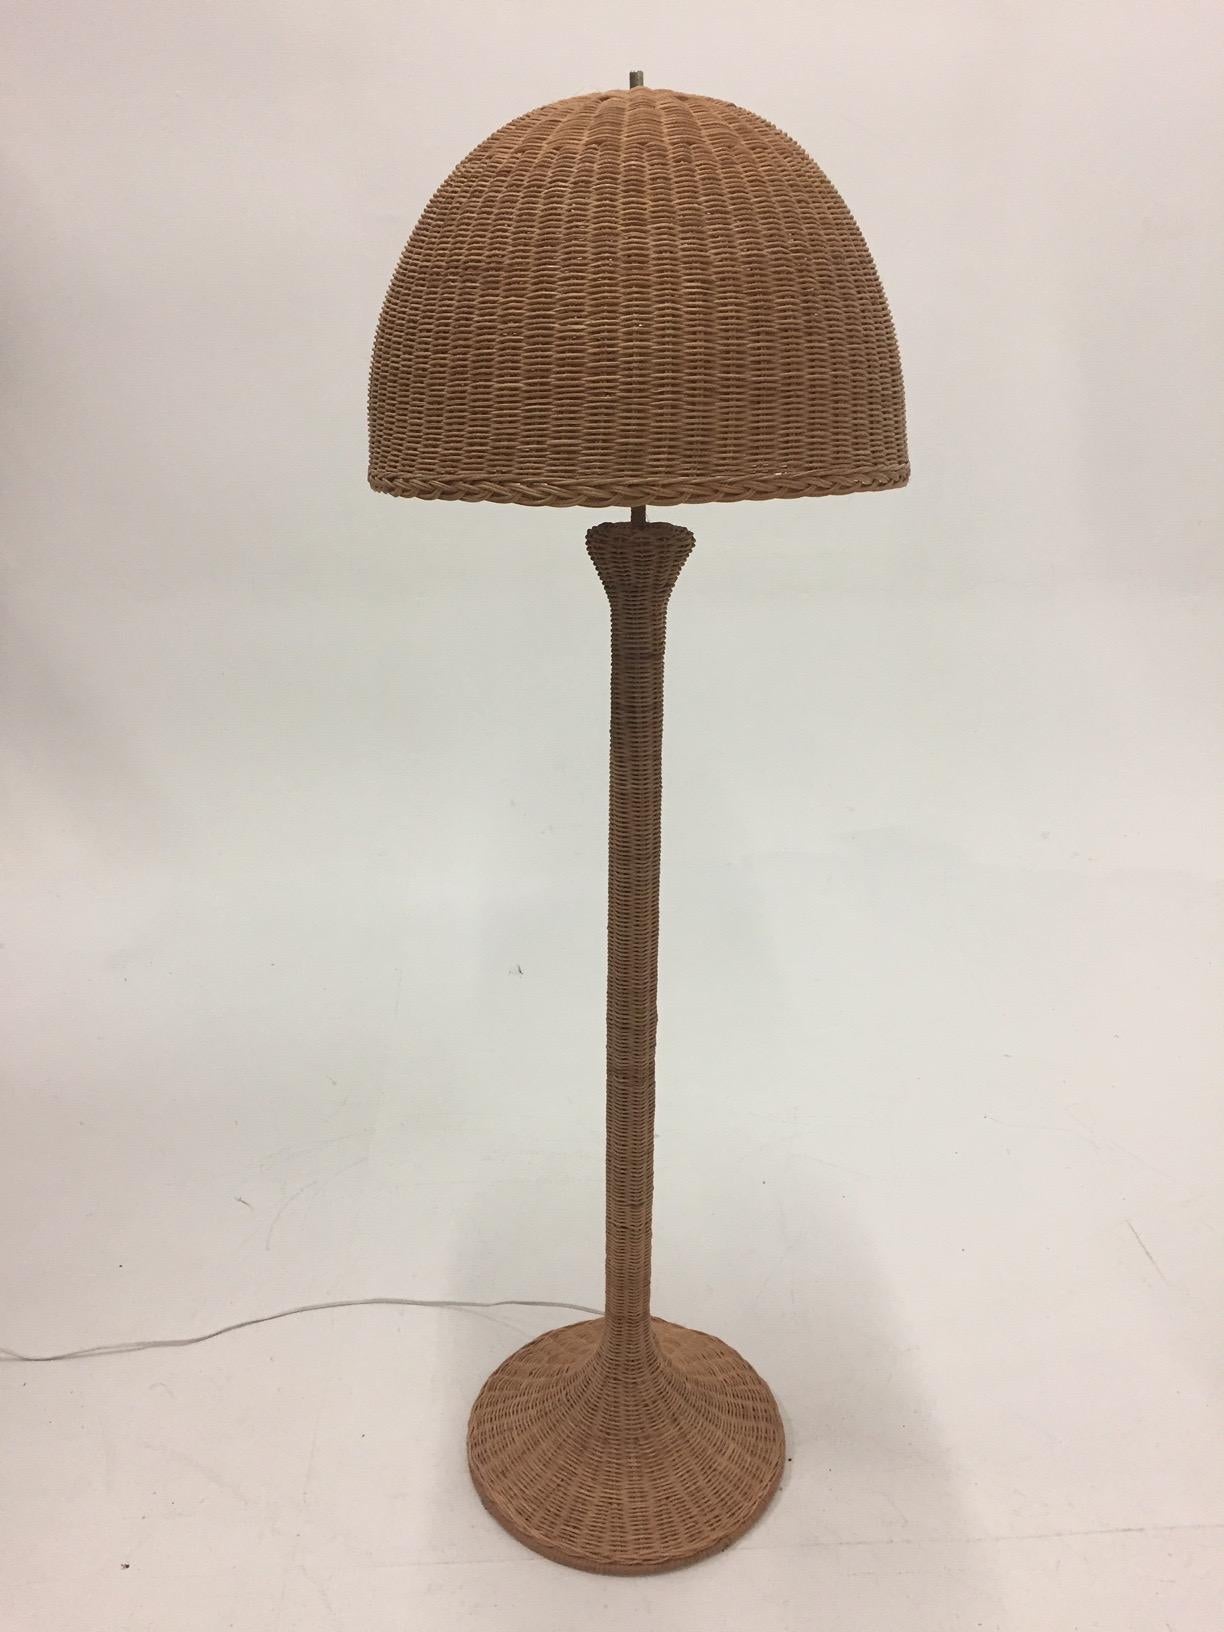 Great on a sun porch or in a beach house, a beautiful vintage wicker floor lamp with fabulous shade.
Measures: Shade 20.5 diameter, 15 height.